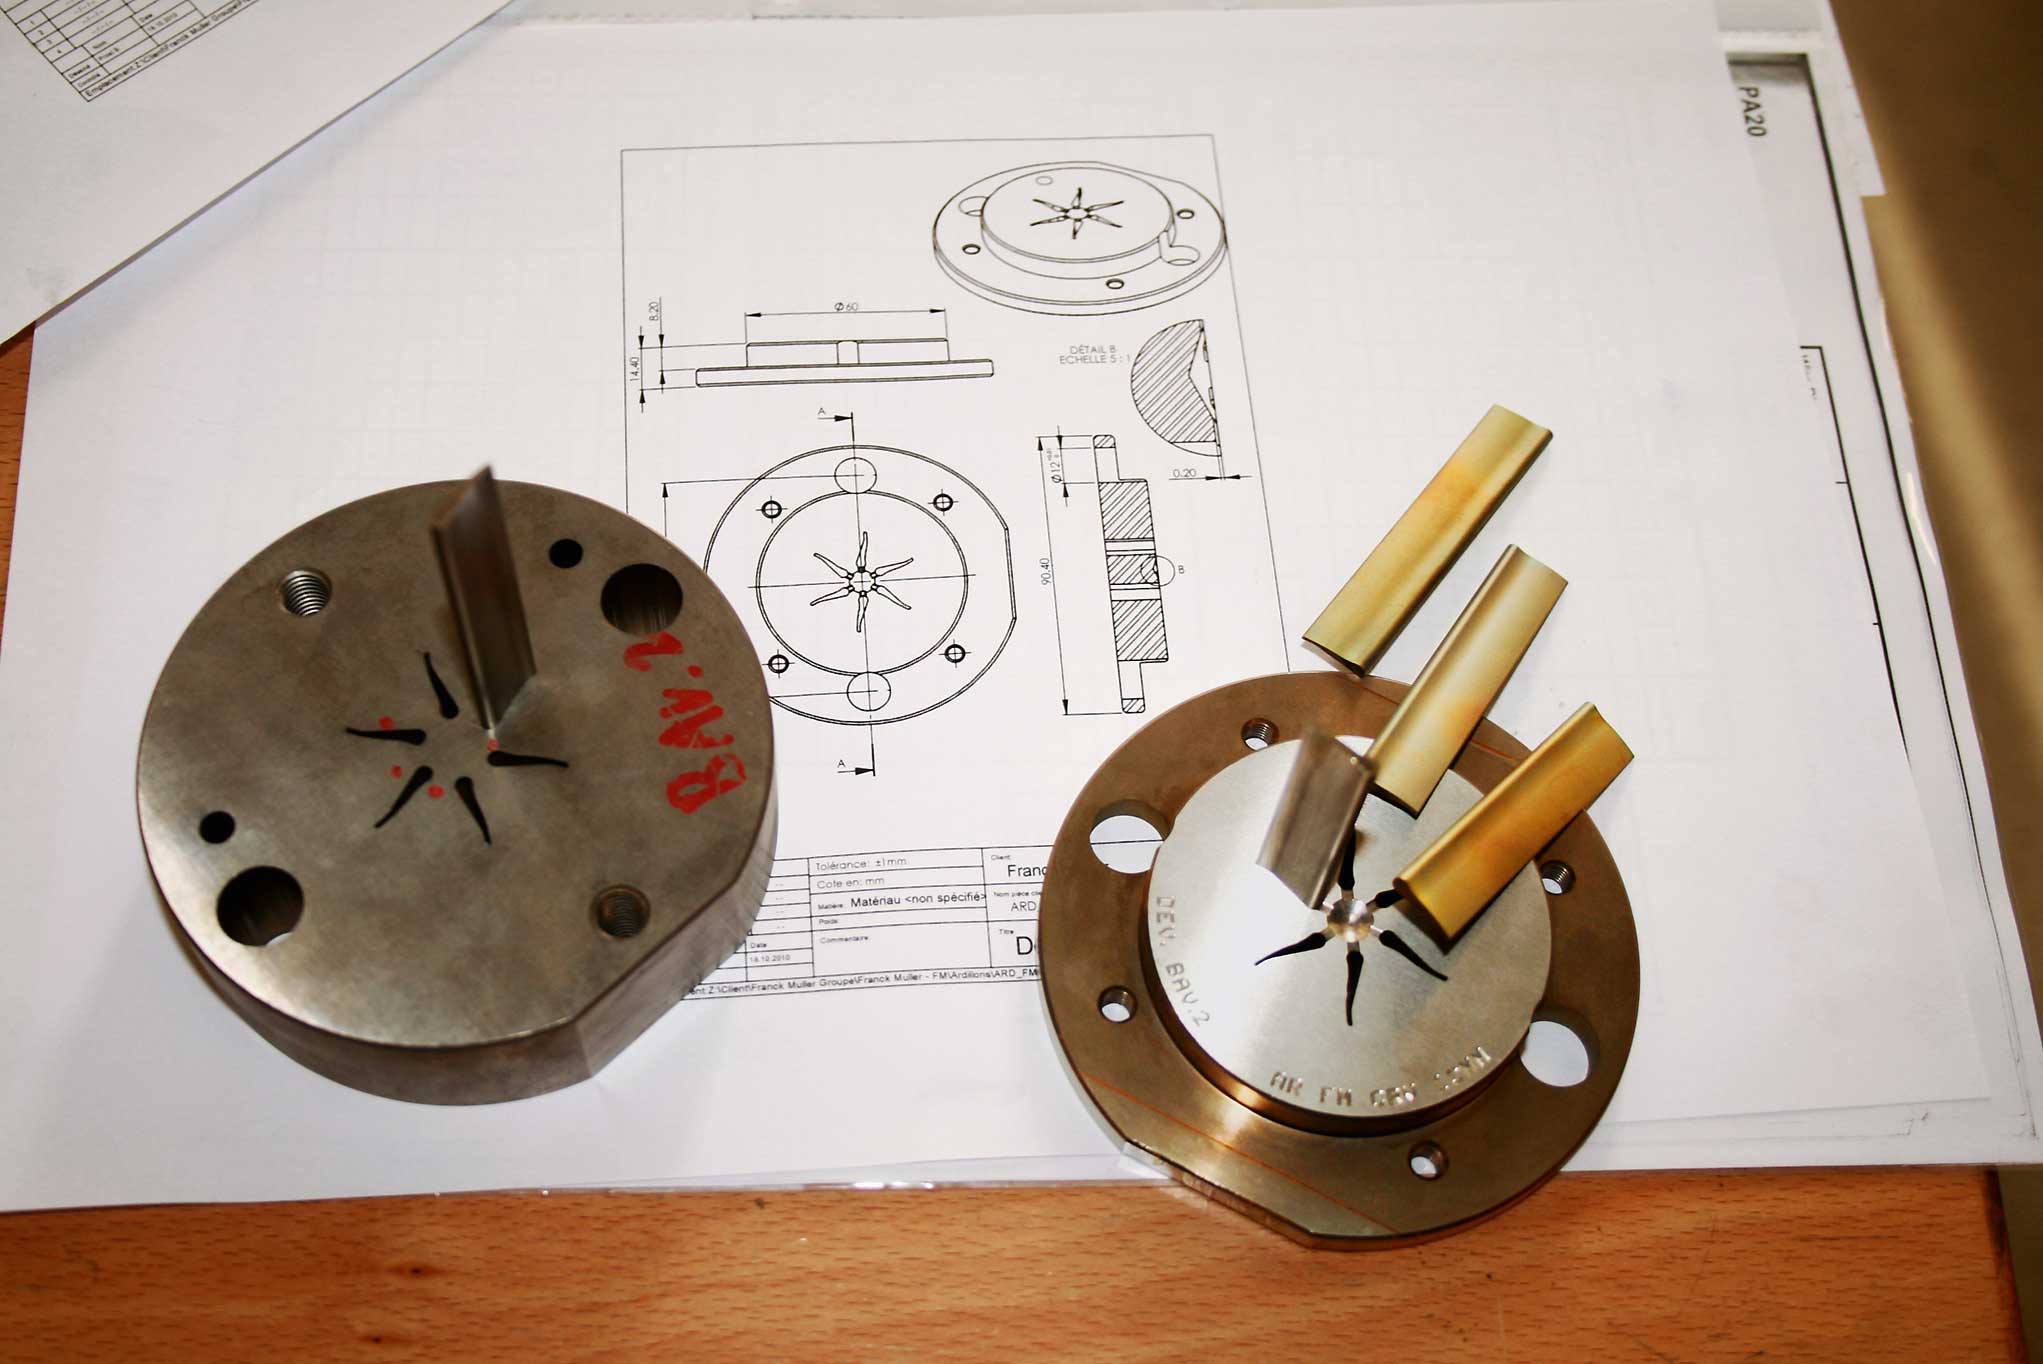 A complex stamping tool set with a drawing – a big challenge for the team and the machines.